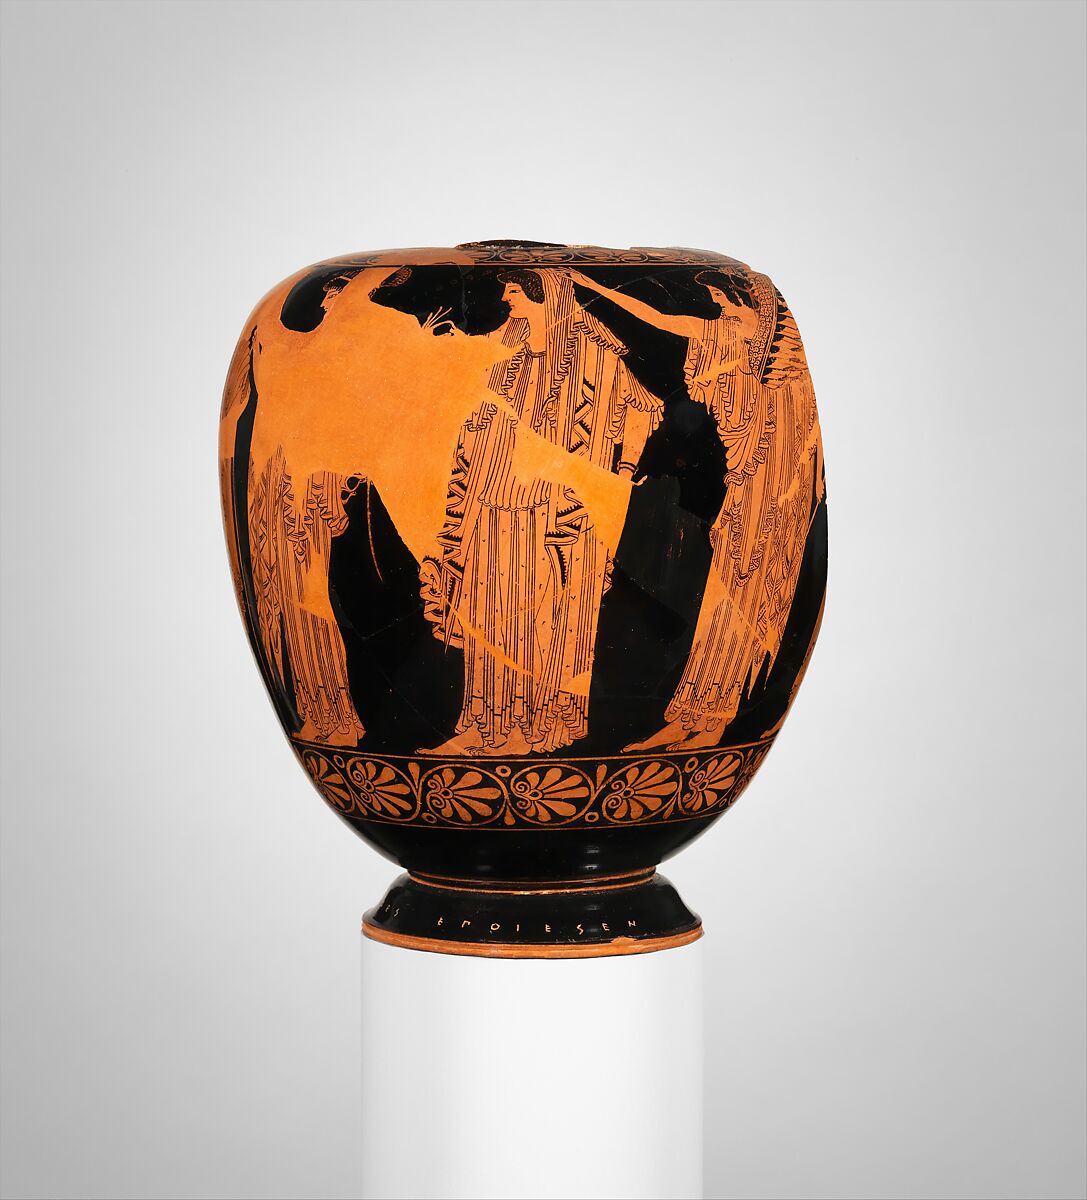 Fragment of a terracotta oinochoe, joins 1981.11.9, Attributed to Euthymides, Potter, Terracotta, Greek, Attic 